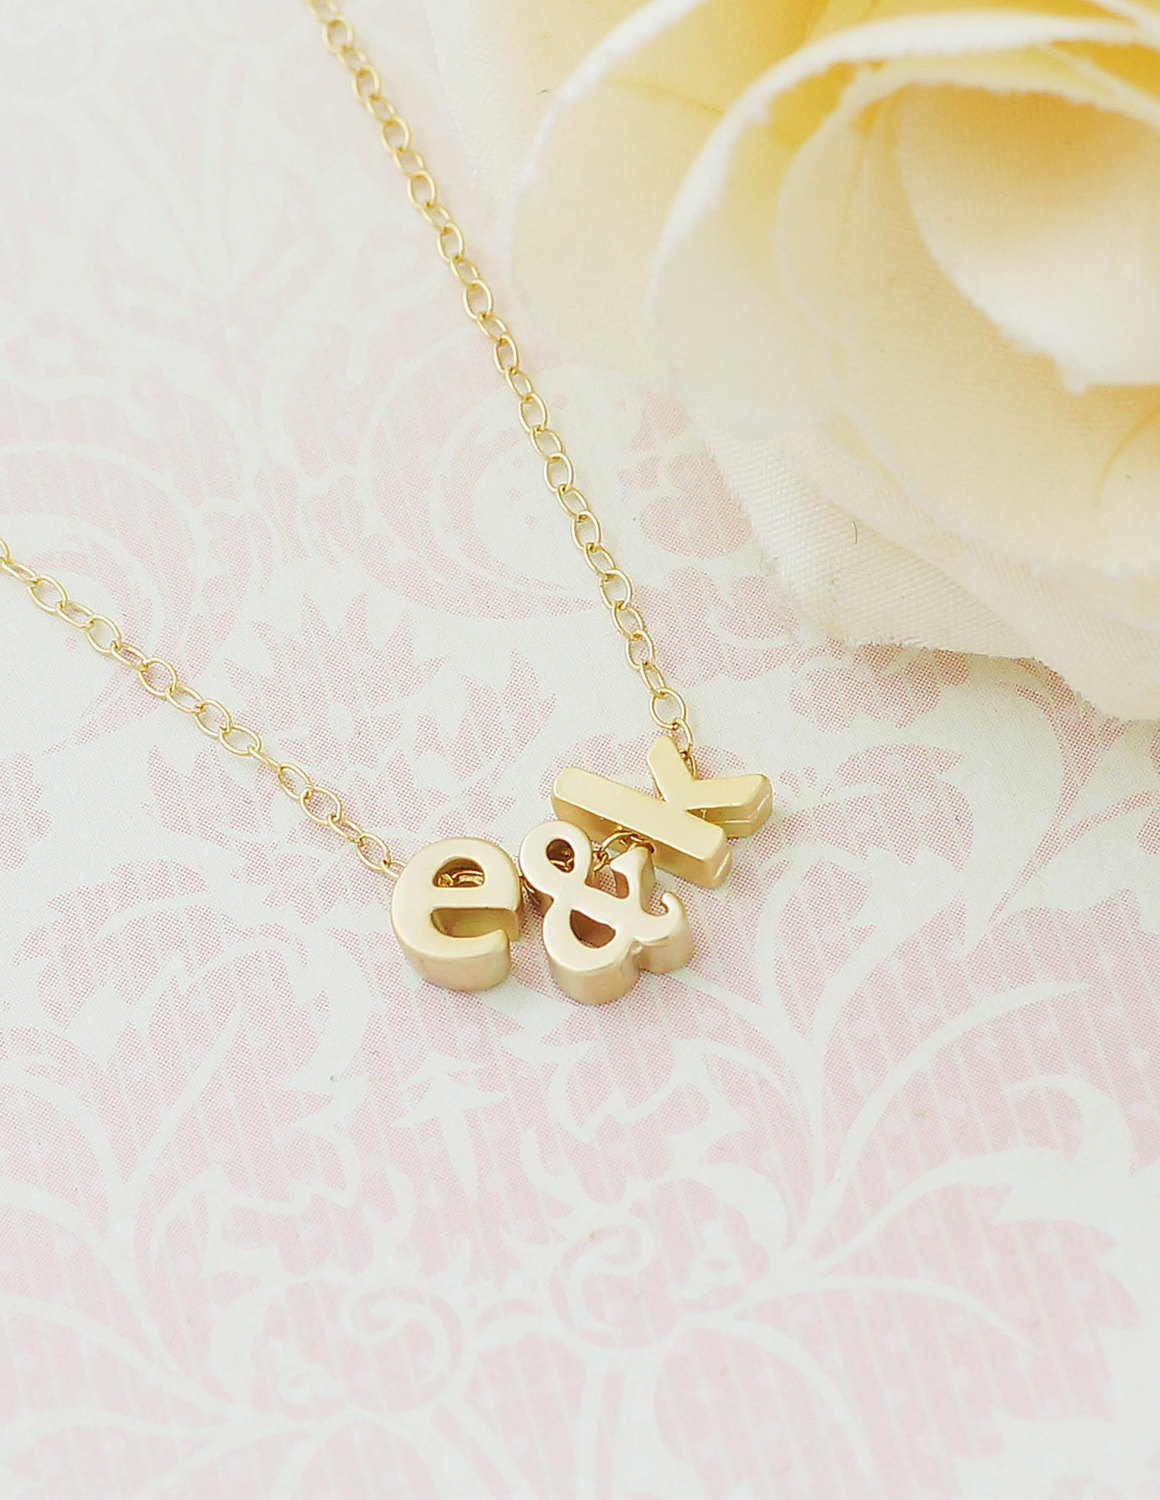 Two Tiny Gold Initials With Ampersand Necklace Gold Filled Chain Personalized Necklace Bridesmaids Gift Weddings Christmas Gift